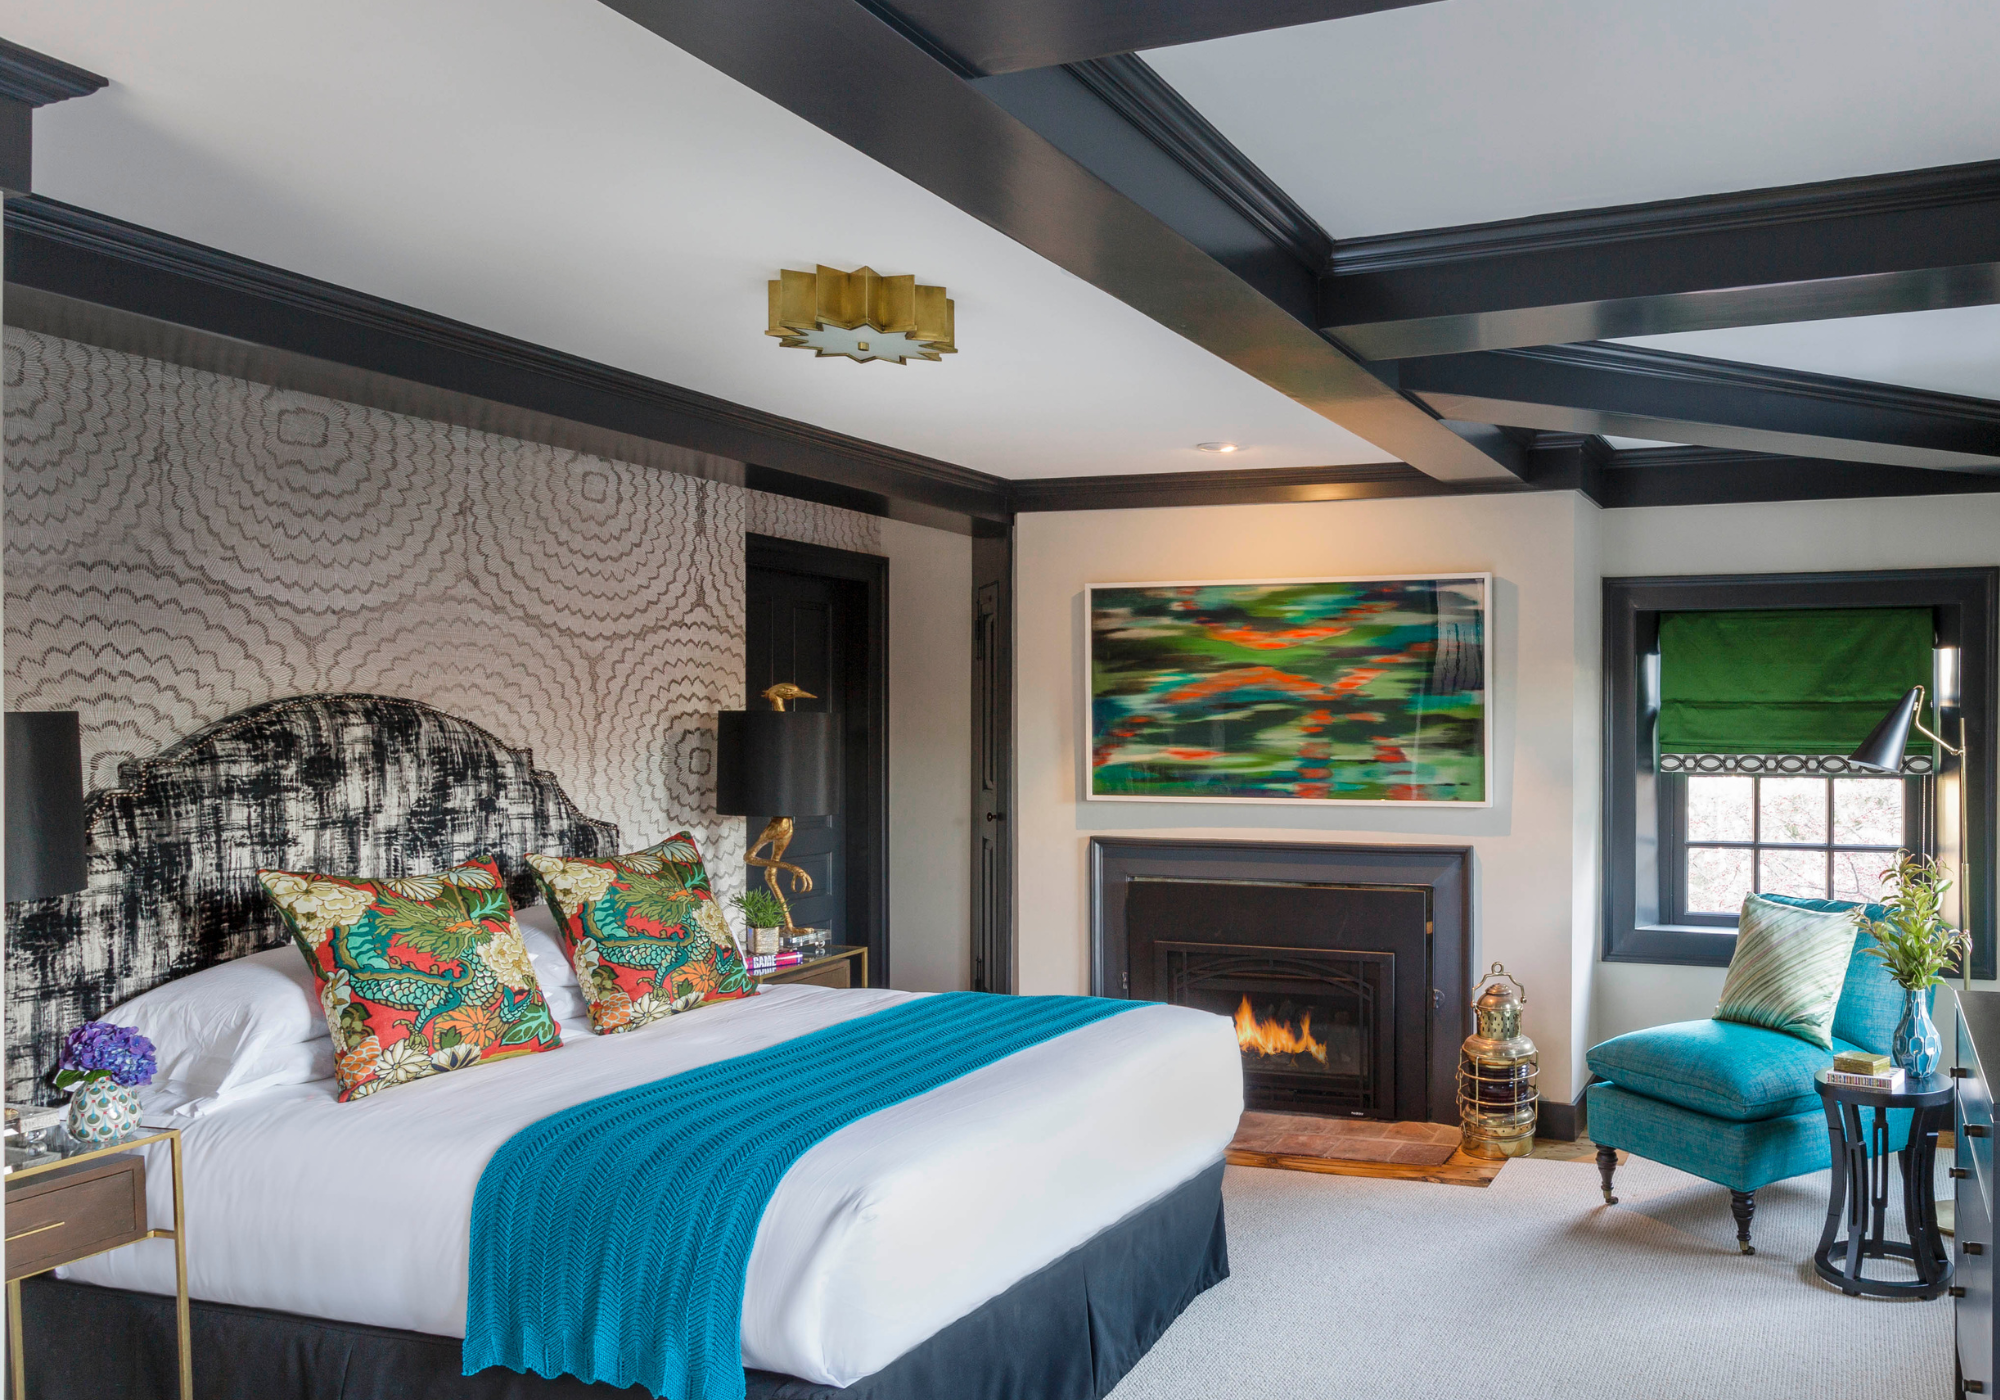 Posh Hotel With Vibrant Colors and Bold Patterns, Rachel Reider Interiors